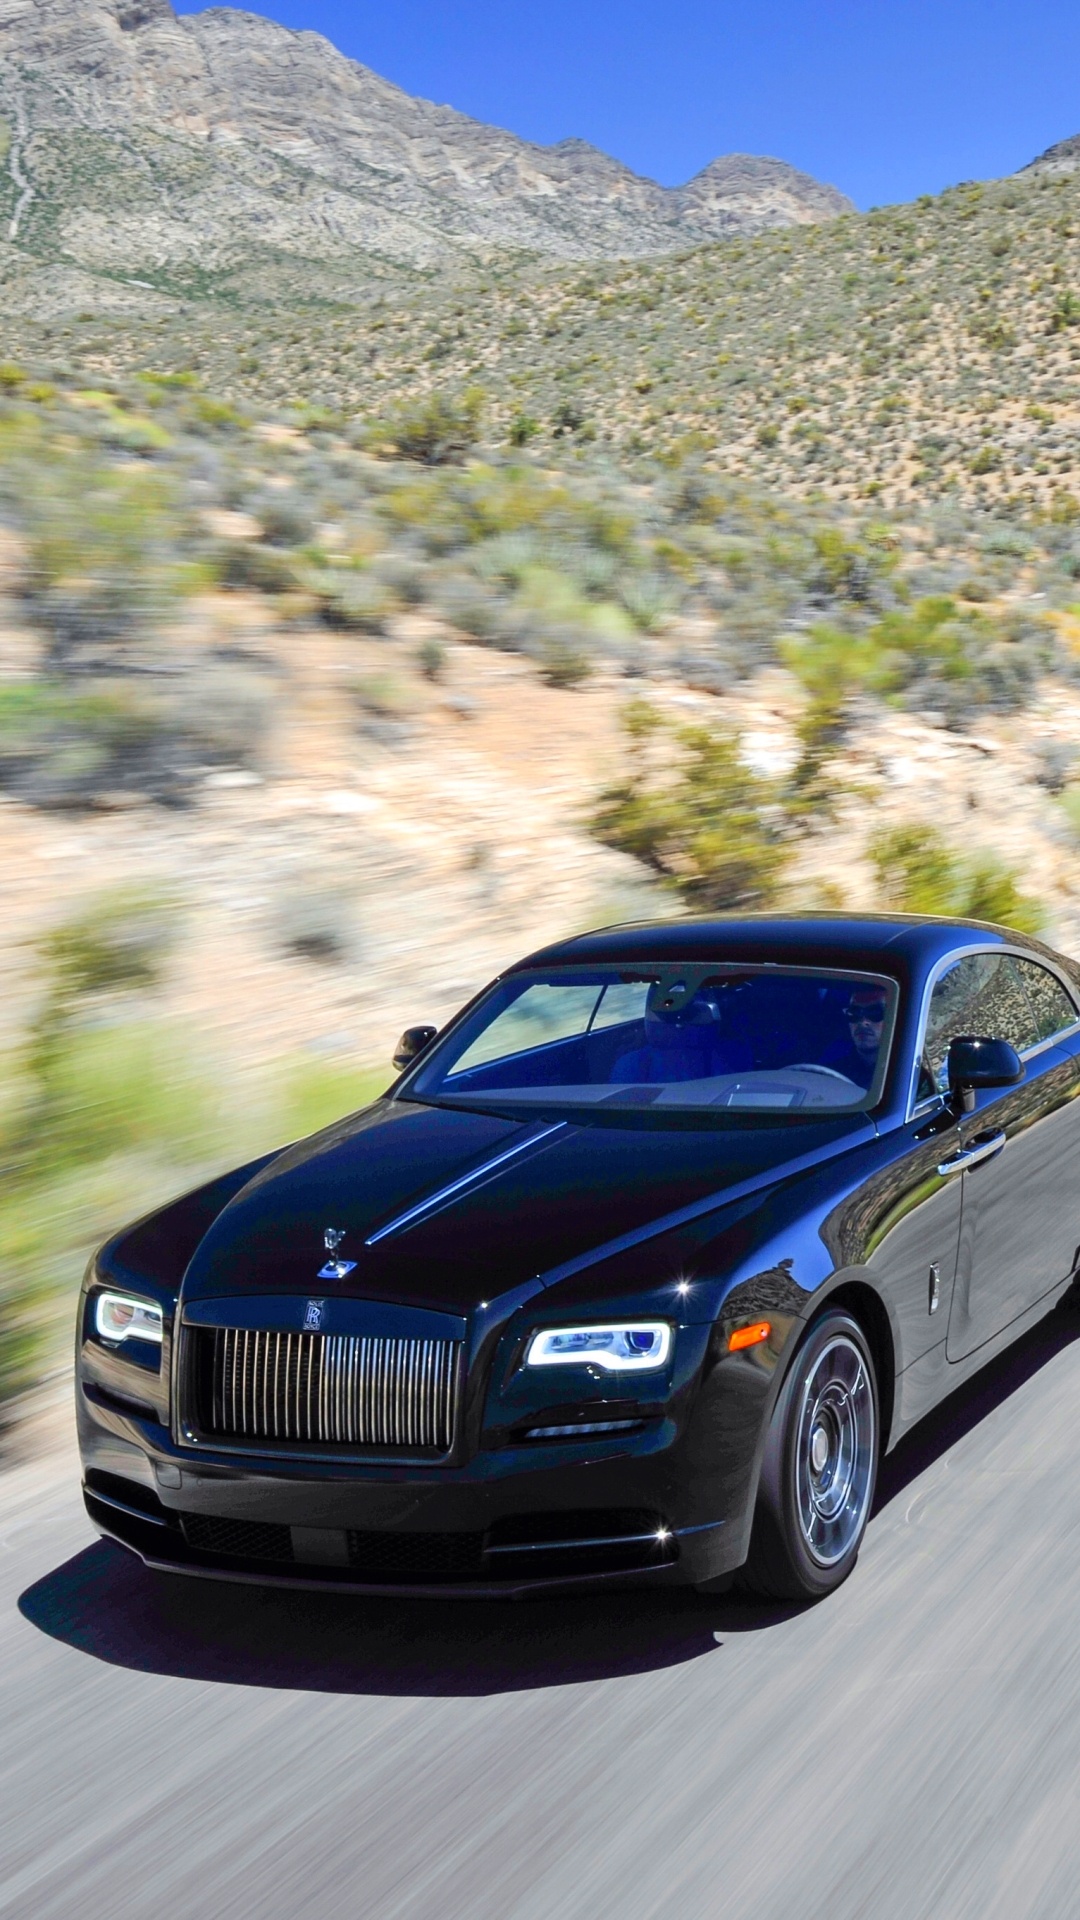 Rolls-Royce Wraith, Classy vehicle, Sophisticated design, Unmatched luxury, 1080x1920 Full HD Phone